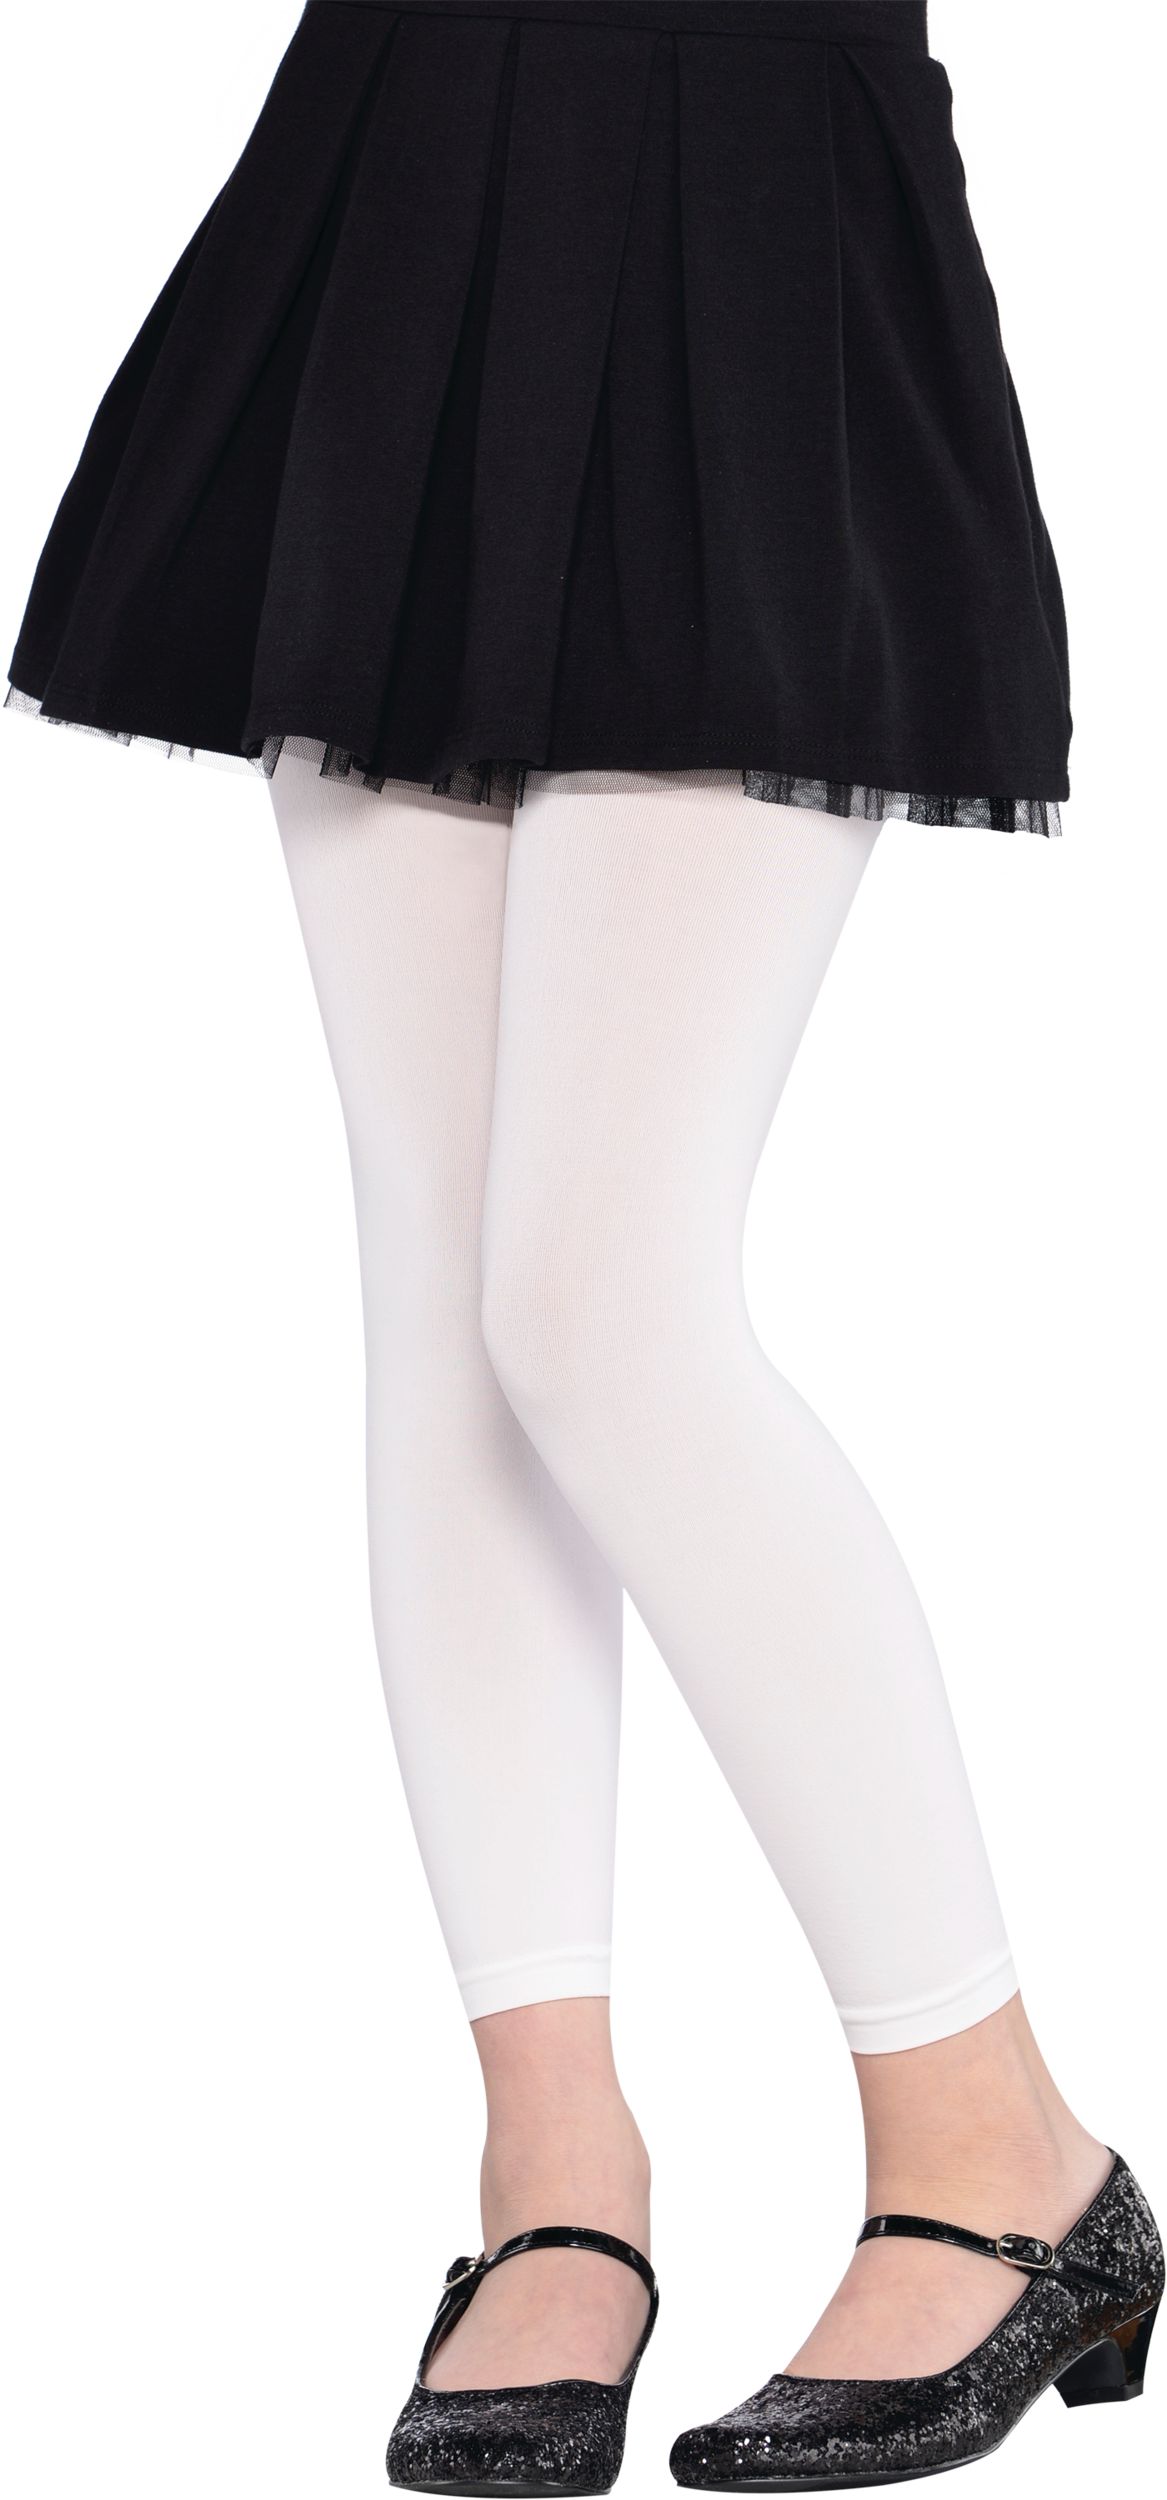 https://media-www.partycity.ca/product/seasonal-gardening/party-city-seasonal/party-city-halloween-and-fall-decor/8519780/child-white-footless-tights-d90f19af-3632-4e5e-91a0-c354fd49f772-jpgrendition.jpg